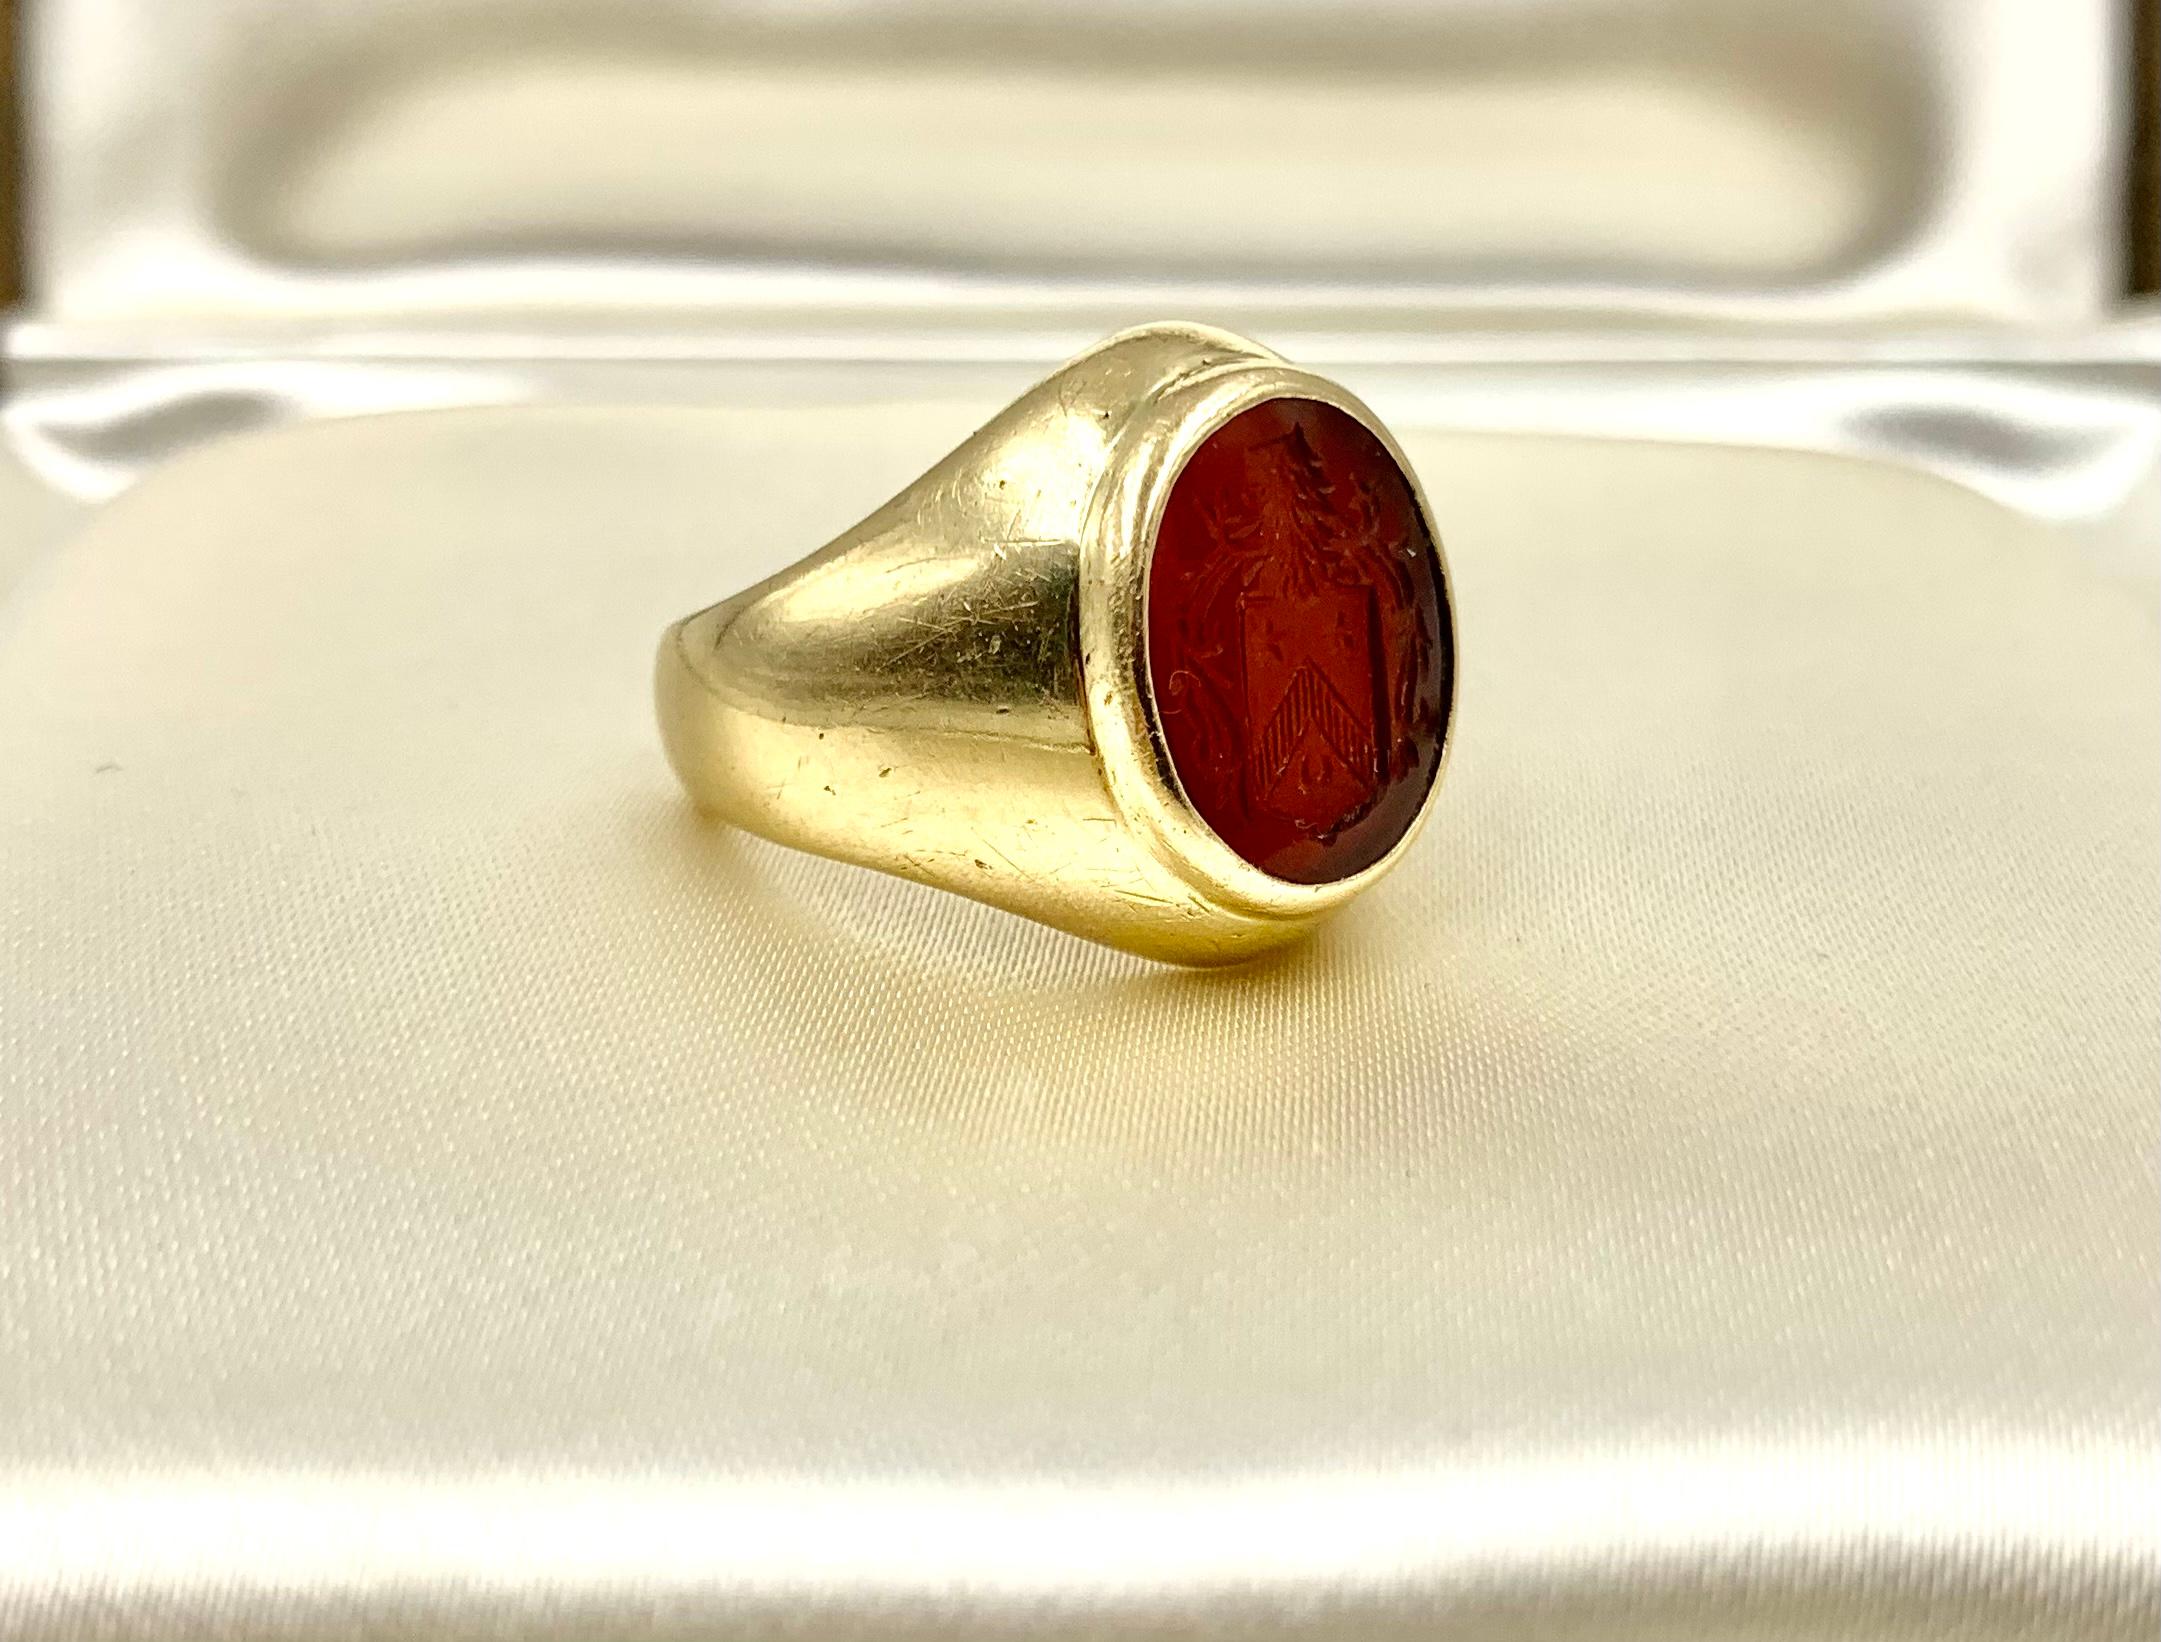 Tiffany & Co. Antique 14K Yellow Gold Carnelian Intaglio Crest Signet Ring For Sale 4